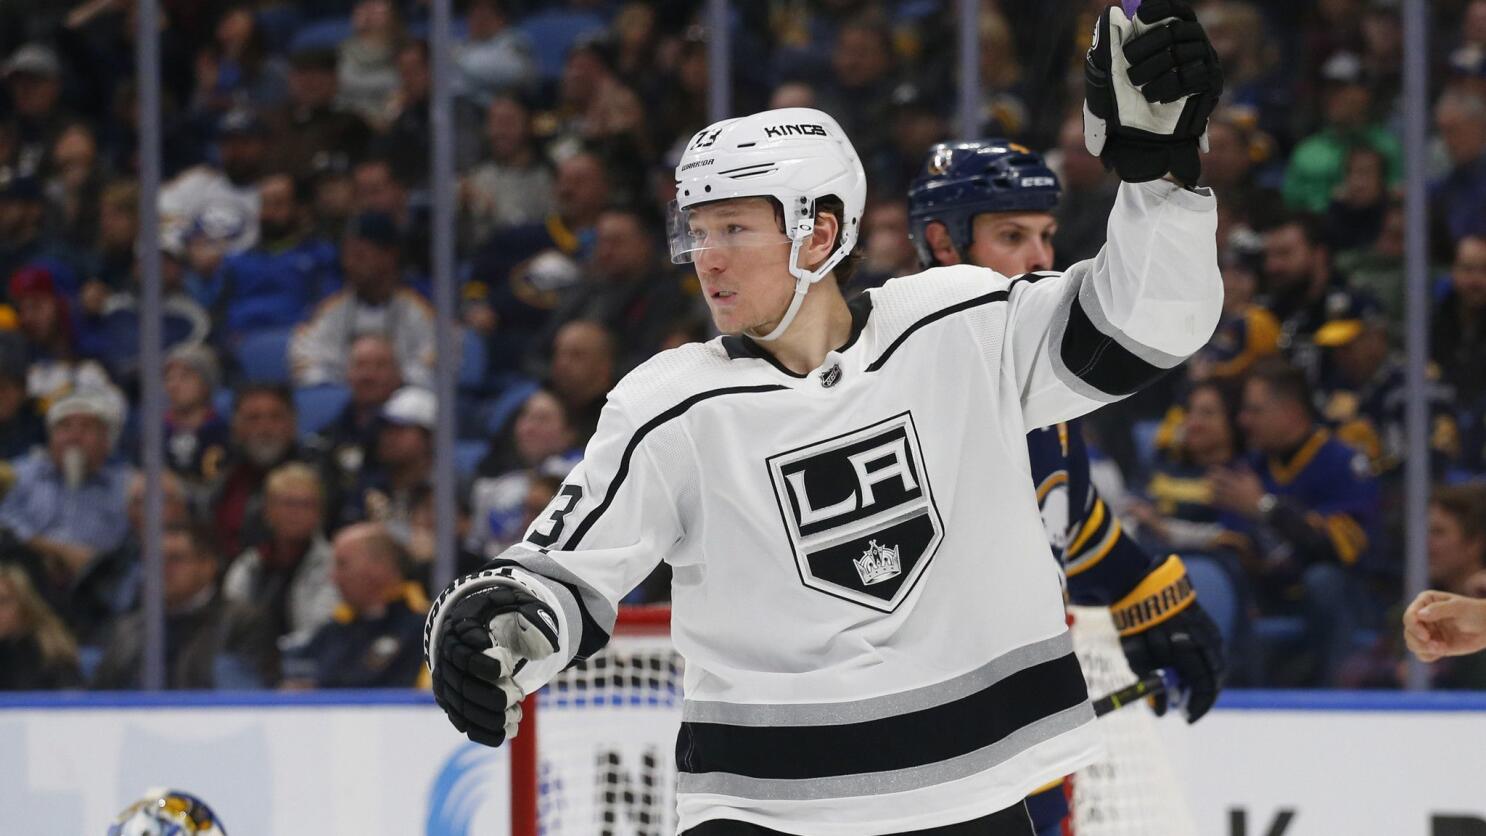 Kings' Derek Forbort: We wanted to come out with hot start